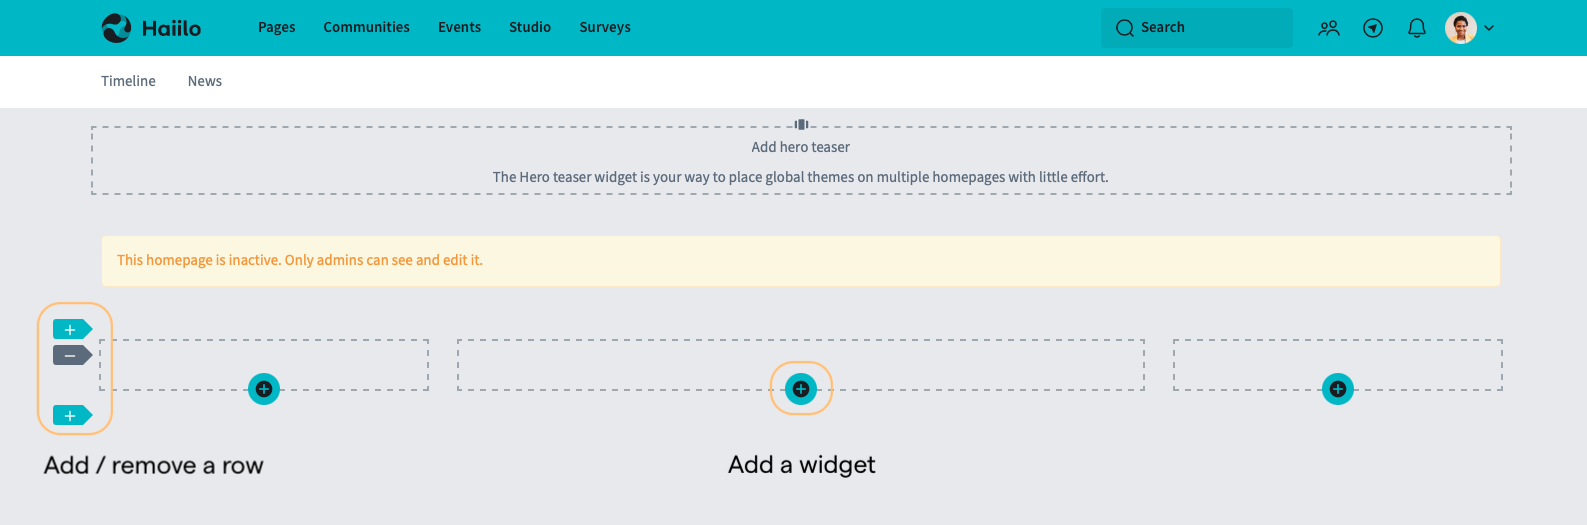 add a row or widget to a homepage.png